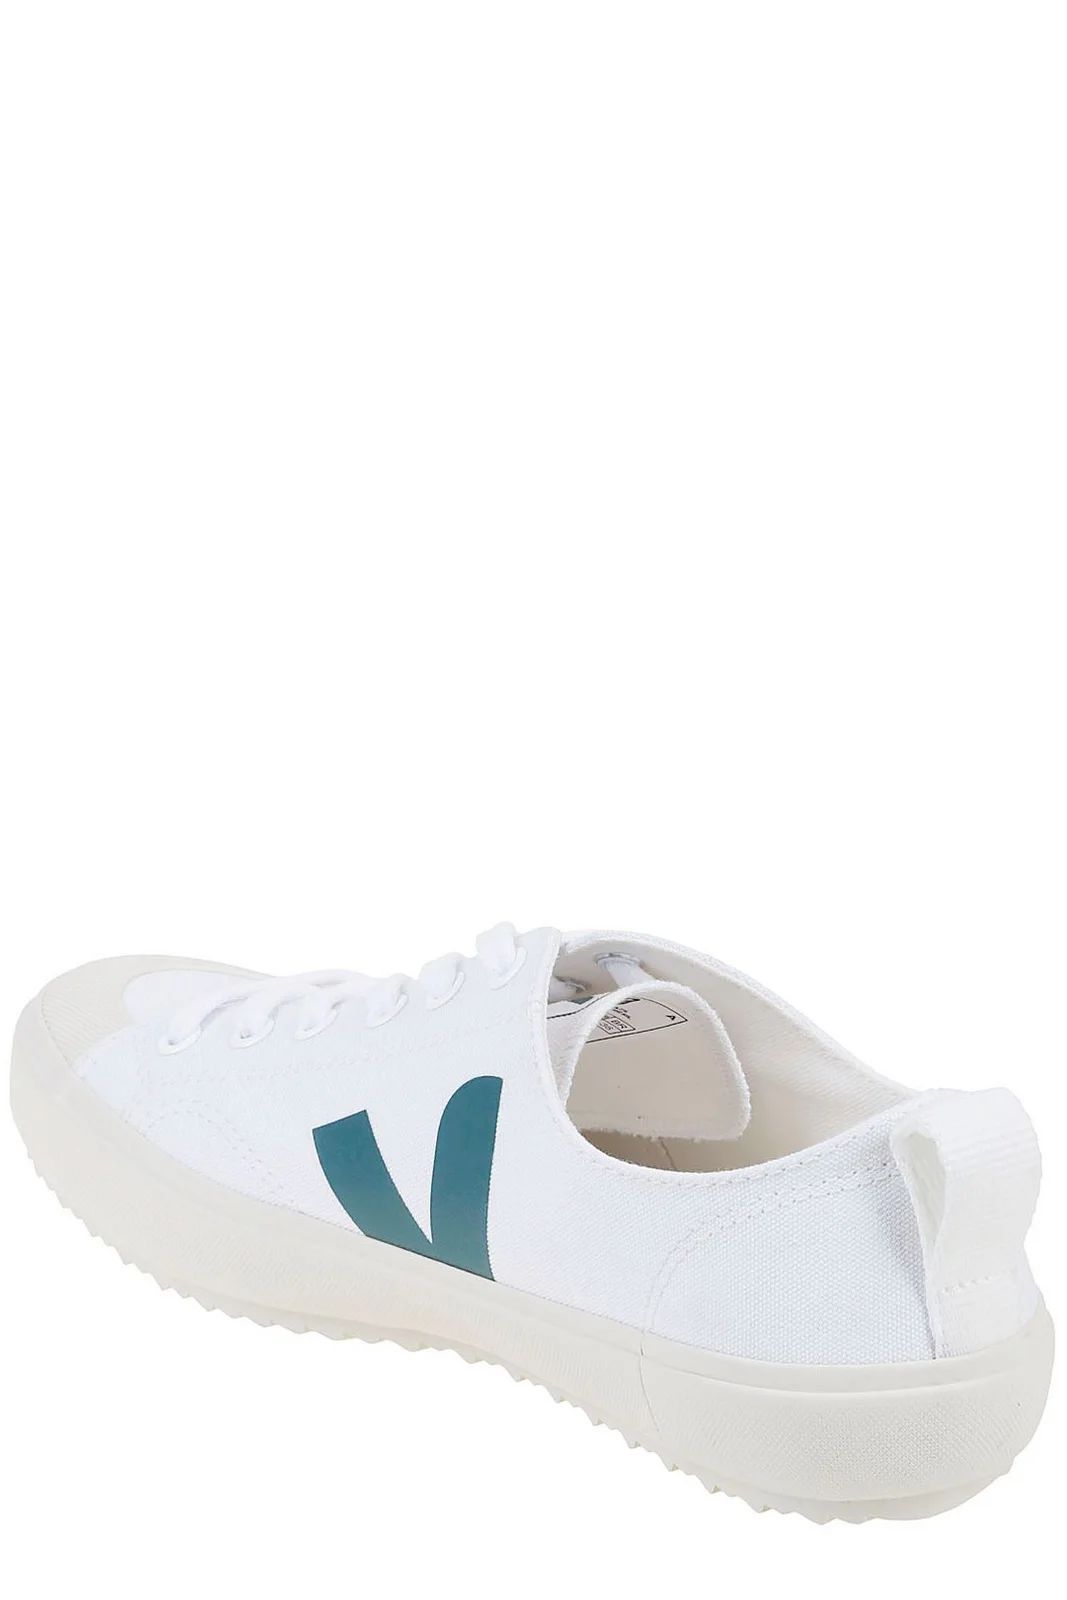 Veja Round Toe Lace-Up Sneakers | Cettire Global